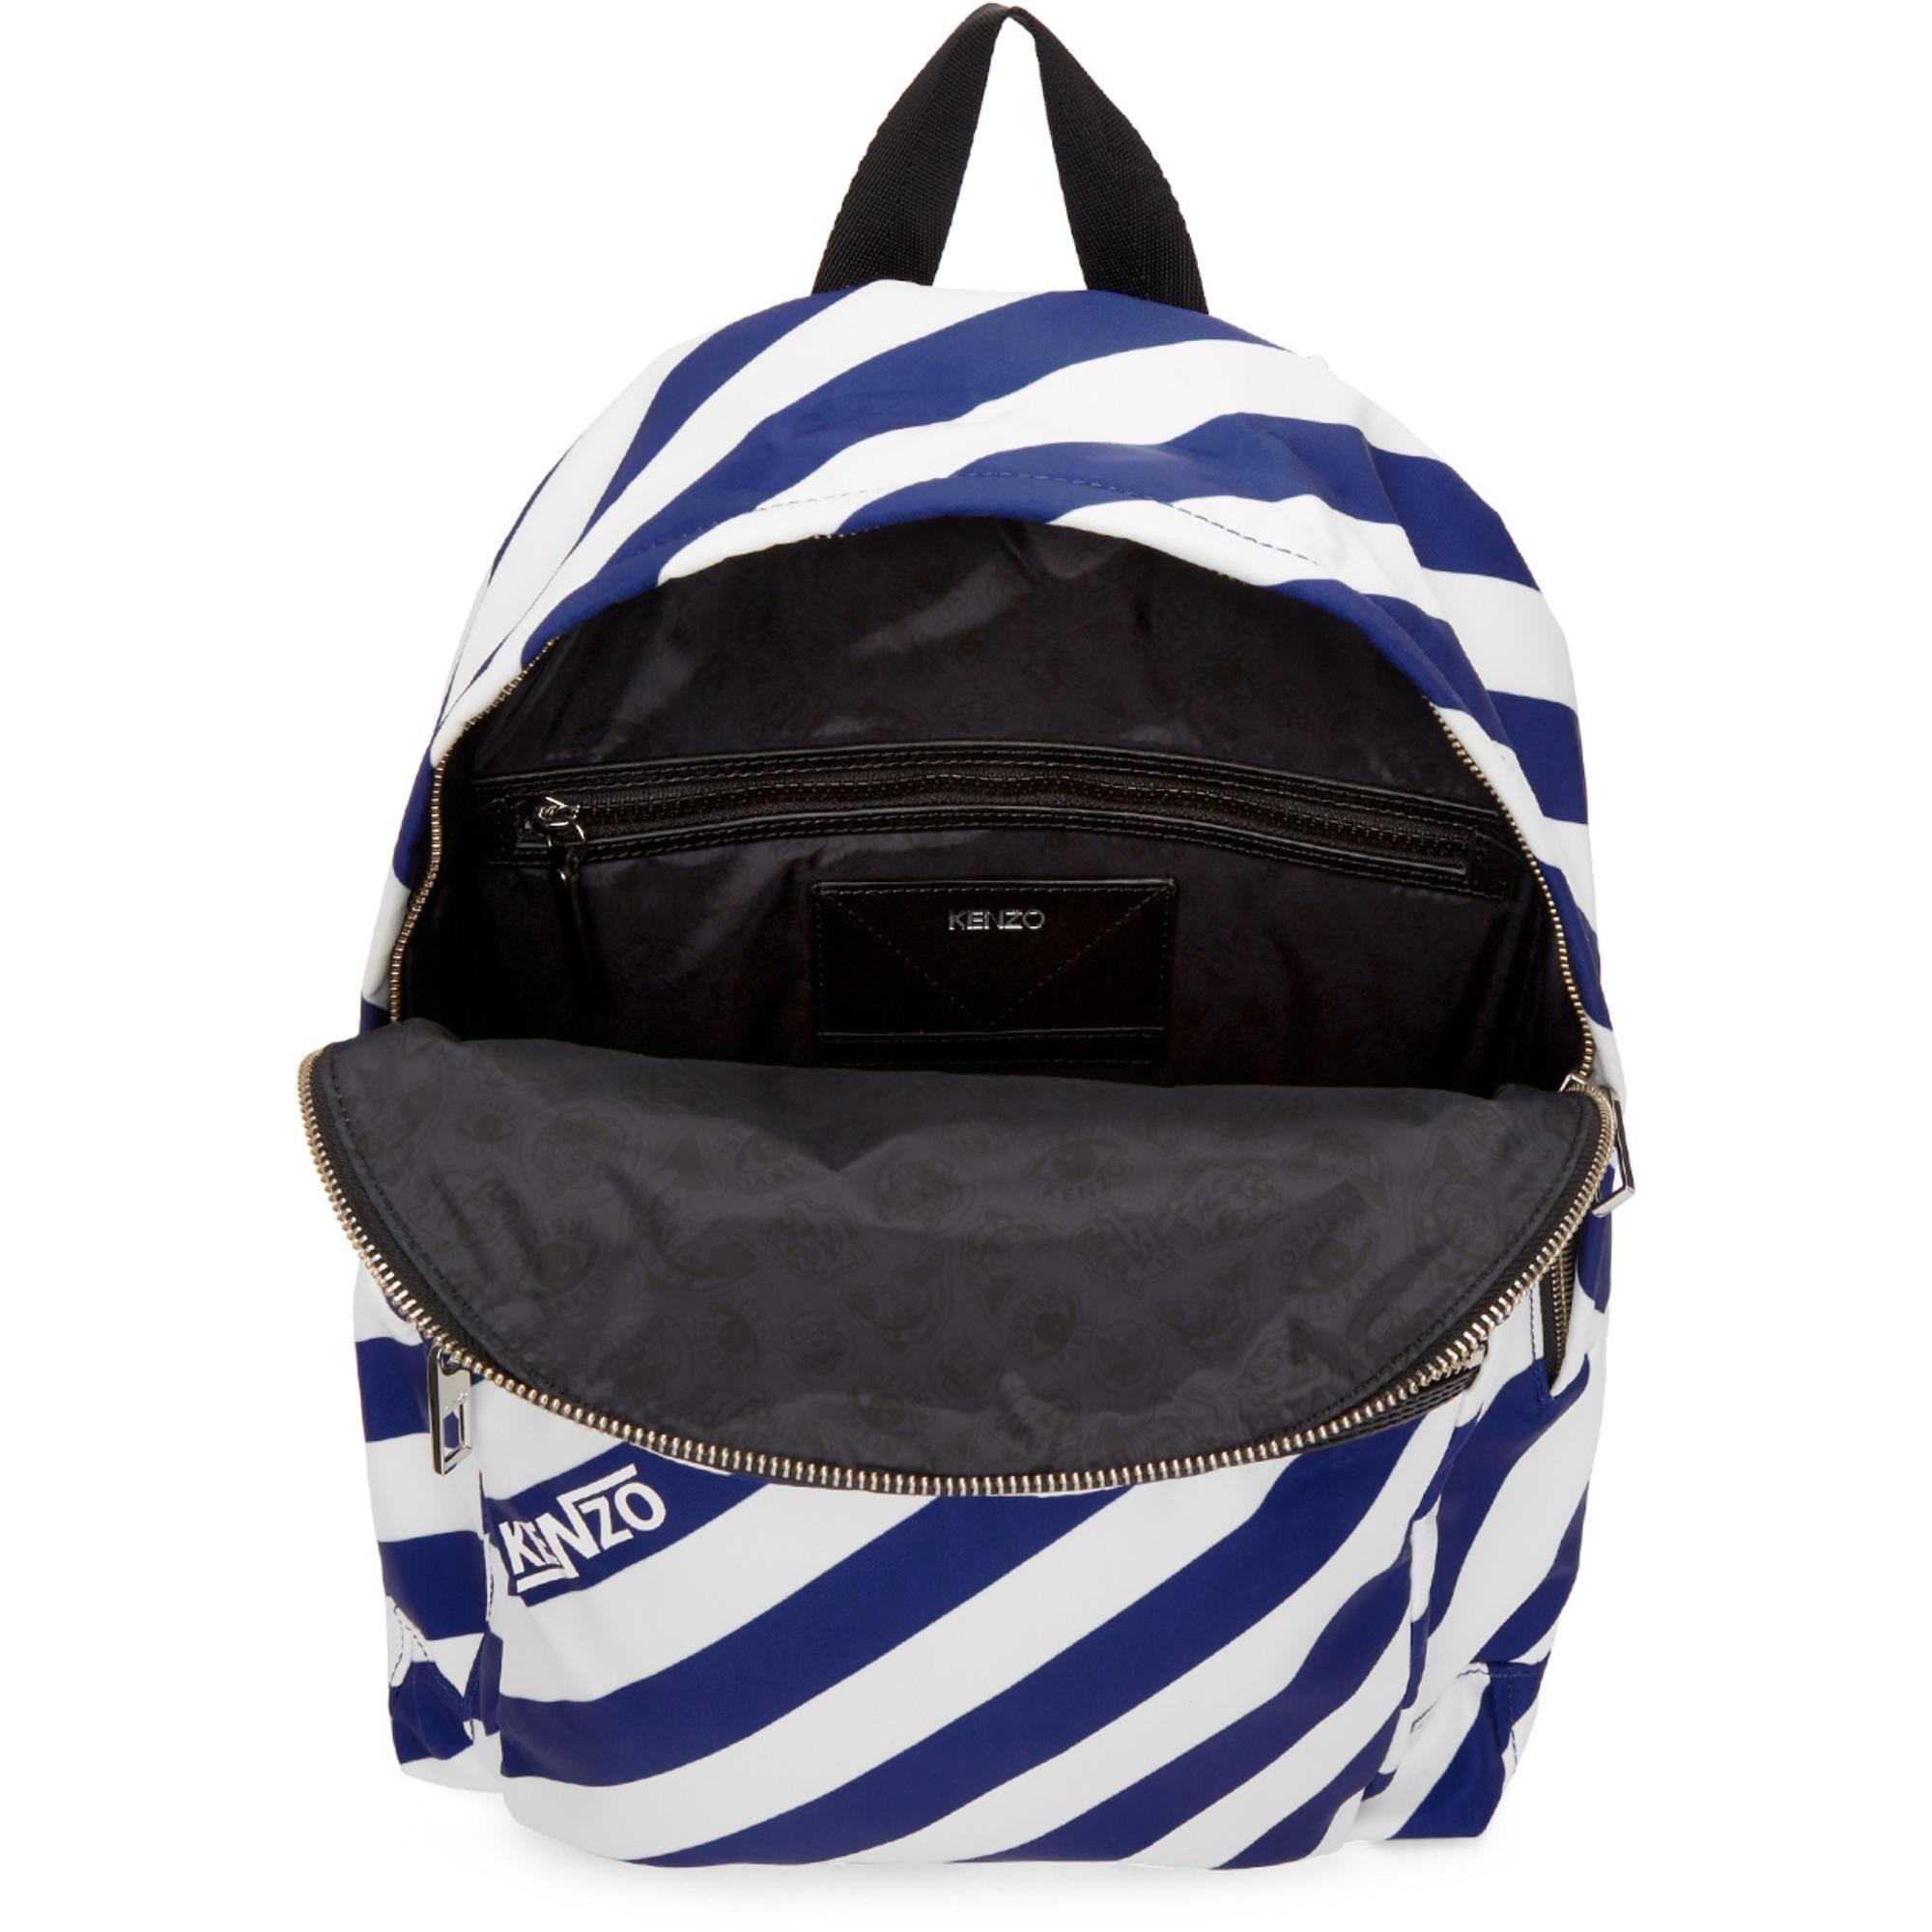 White and Blue Striped Logo - KENZO Blue And White Striped Logo Rucksack in Blue for Men - Lyst